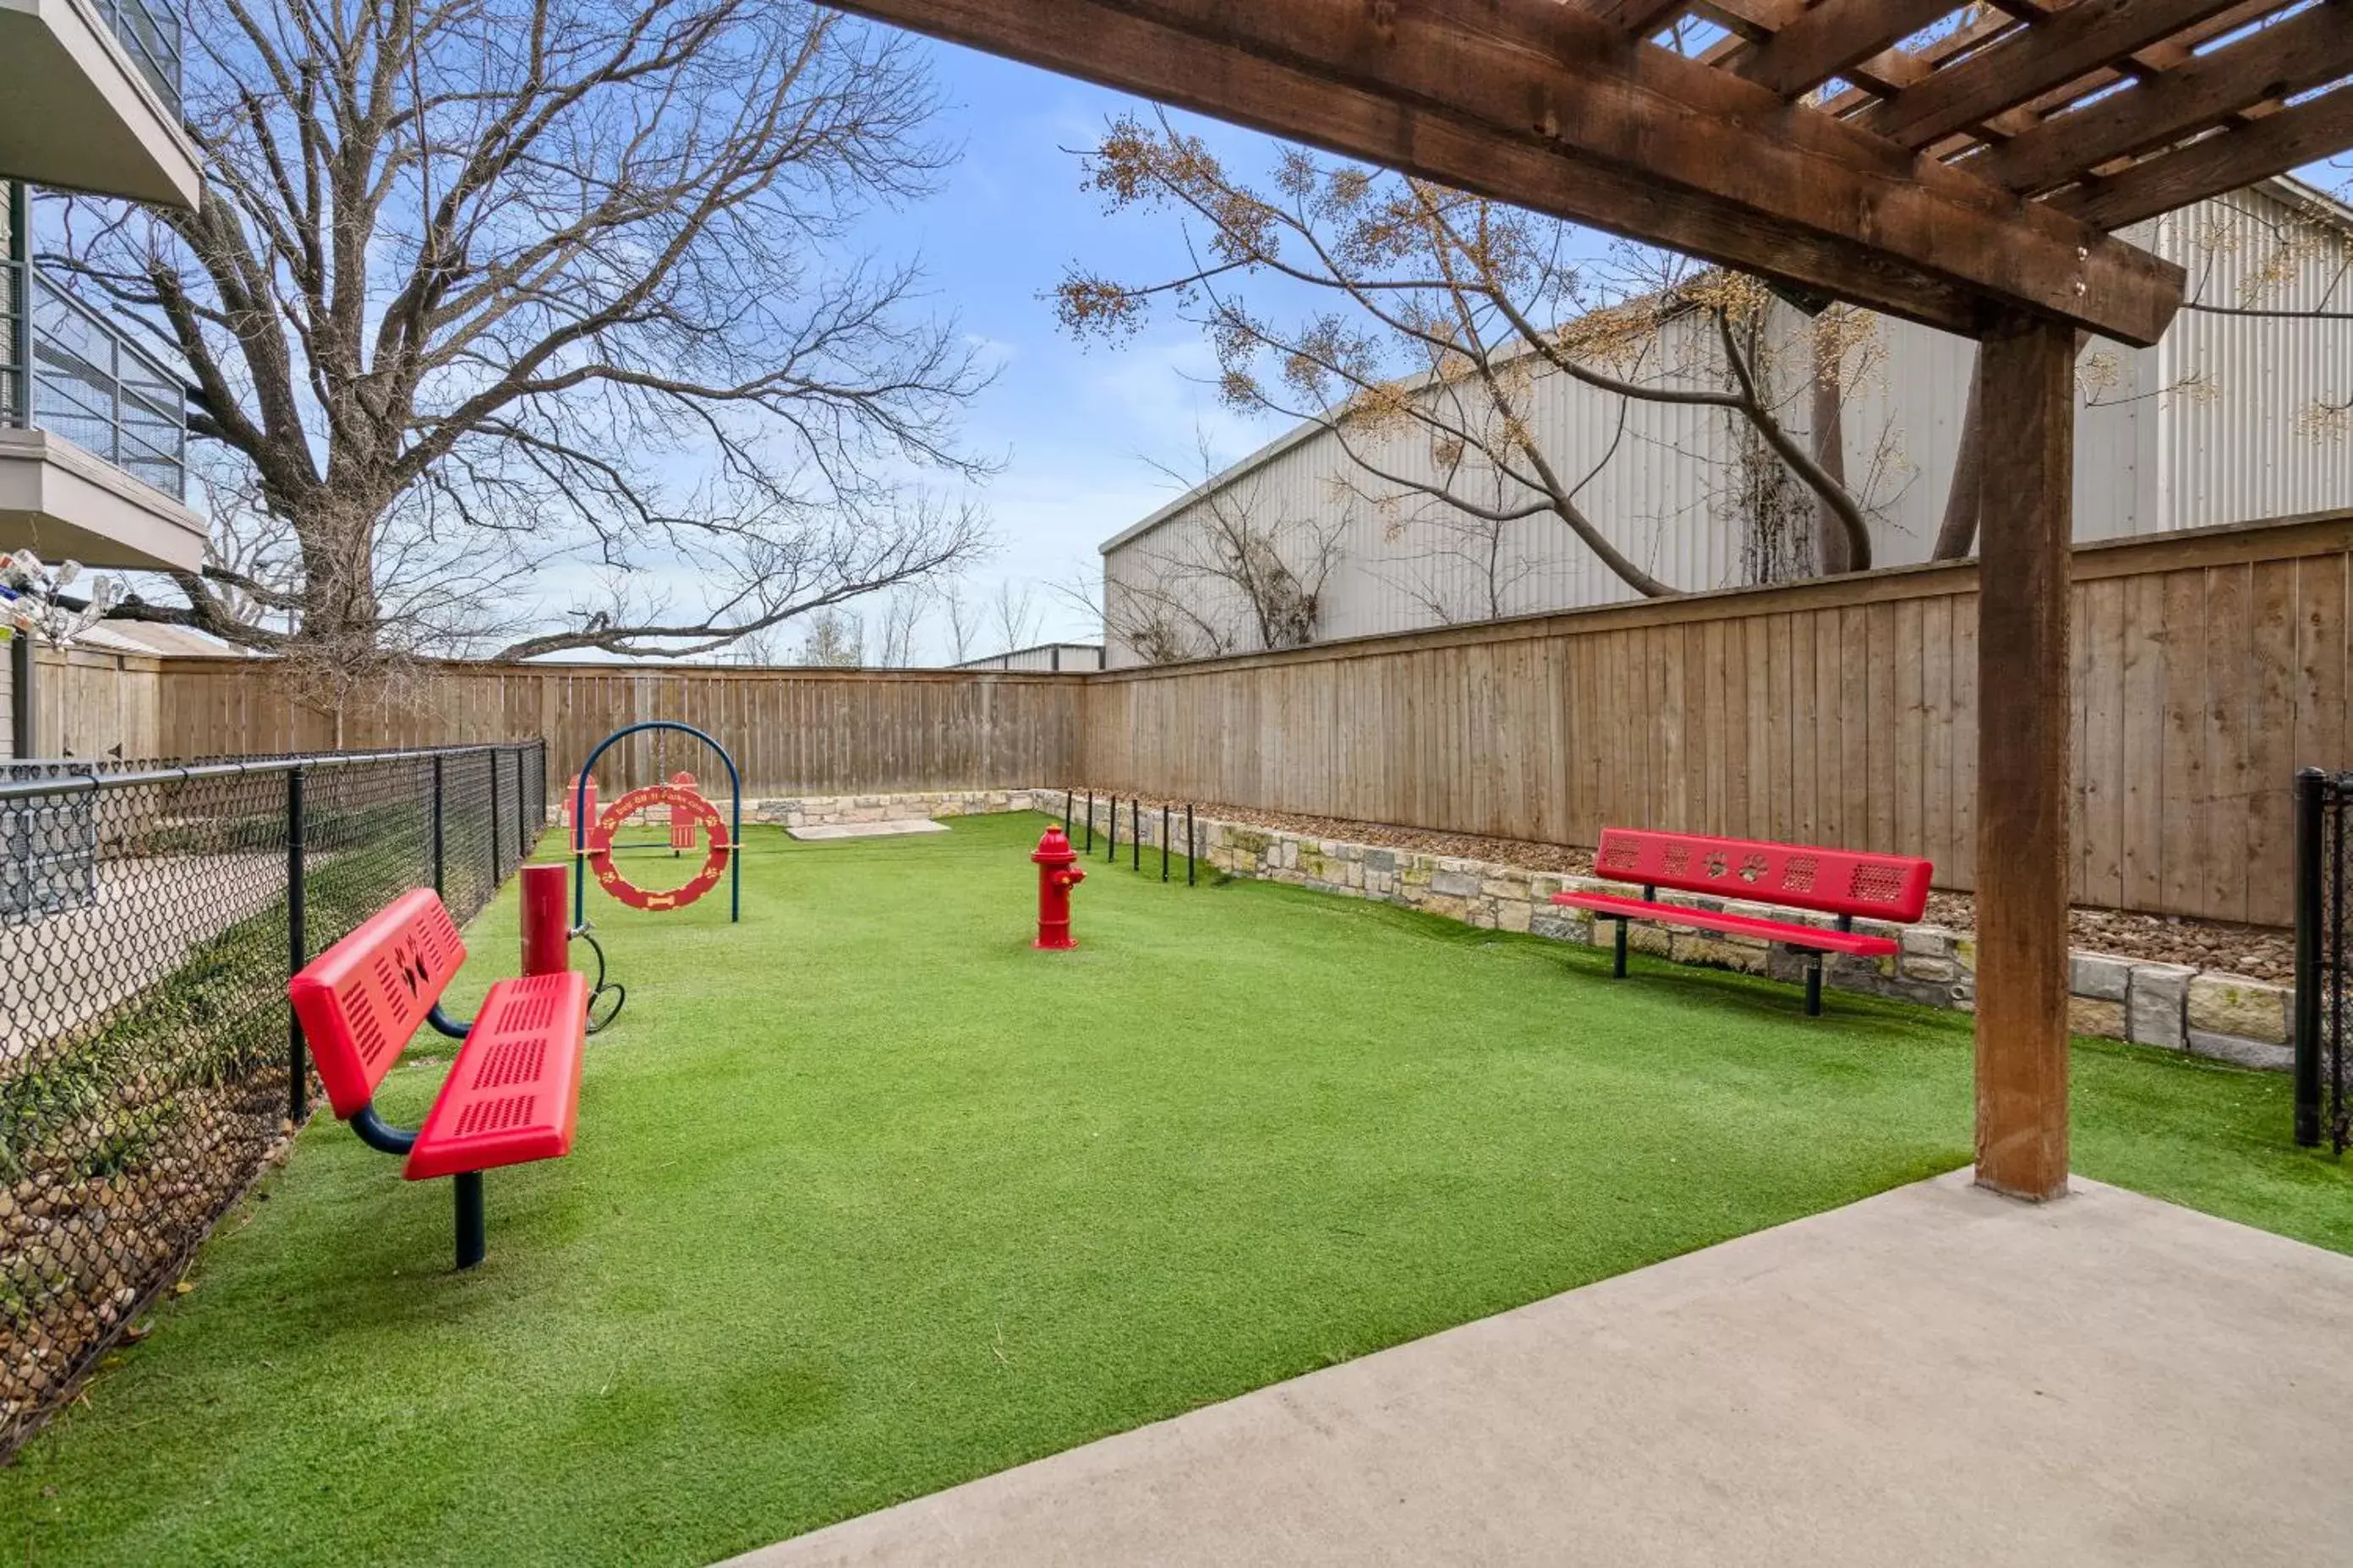 Pets, Children's Play Area in Kasa Love Field-Medical District Dallas